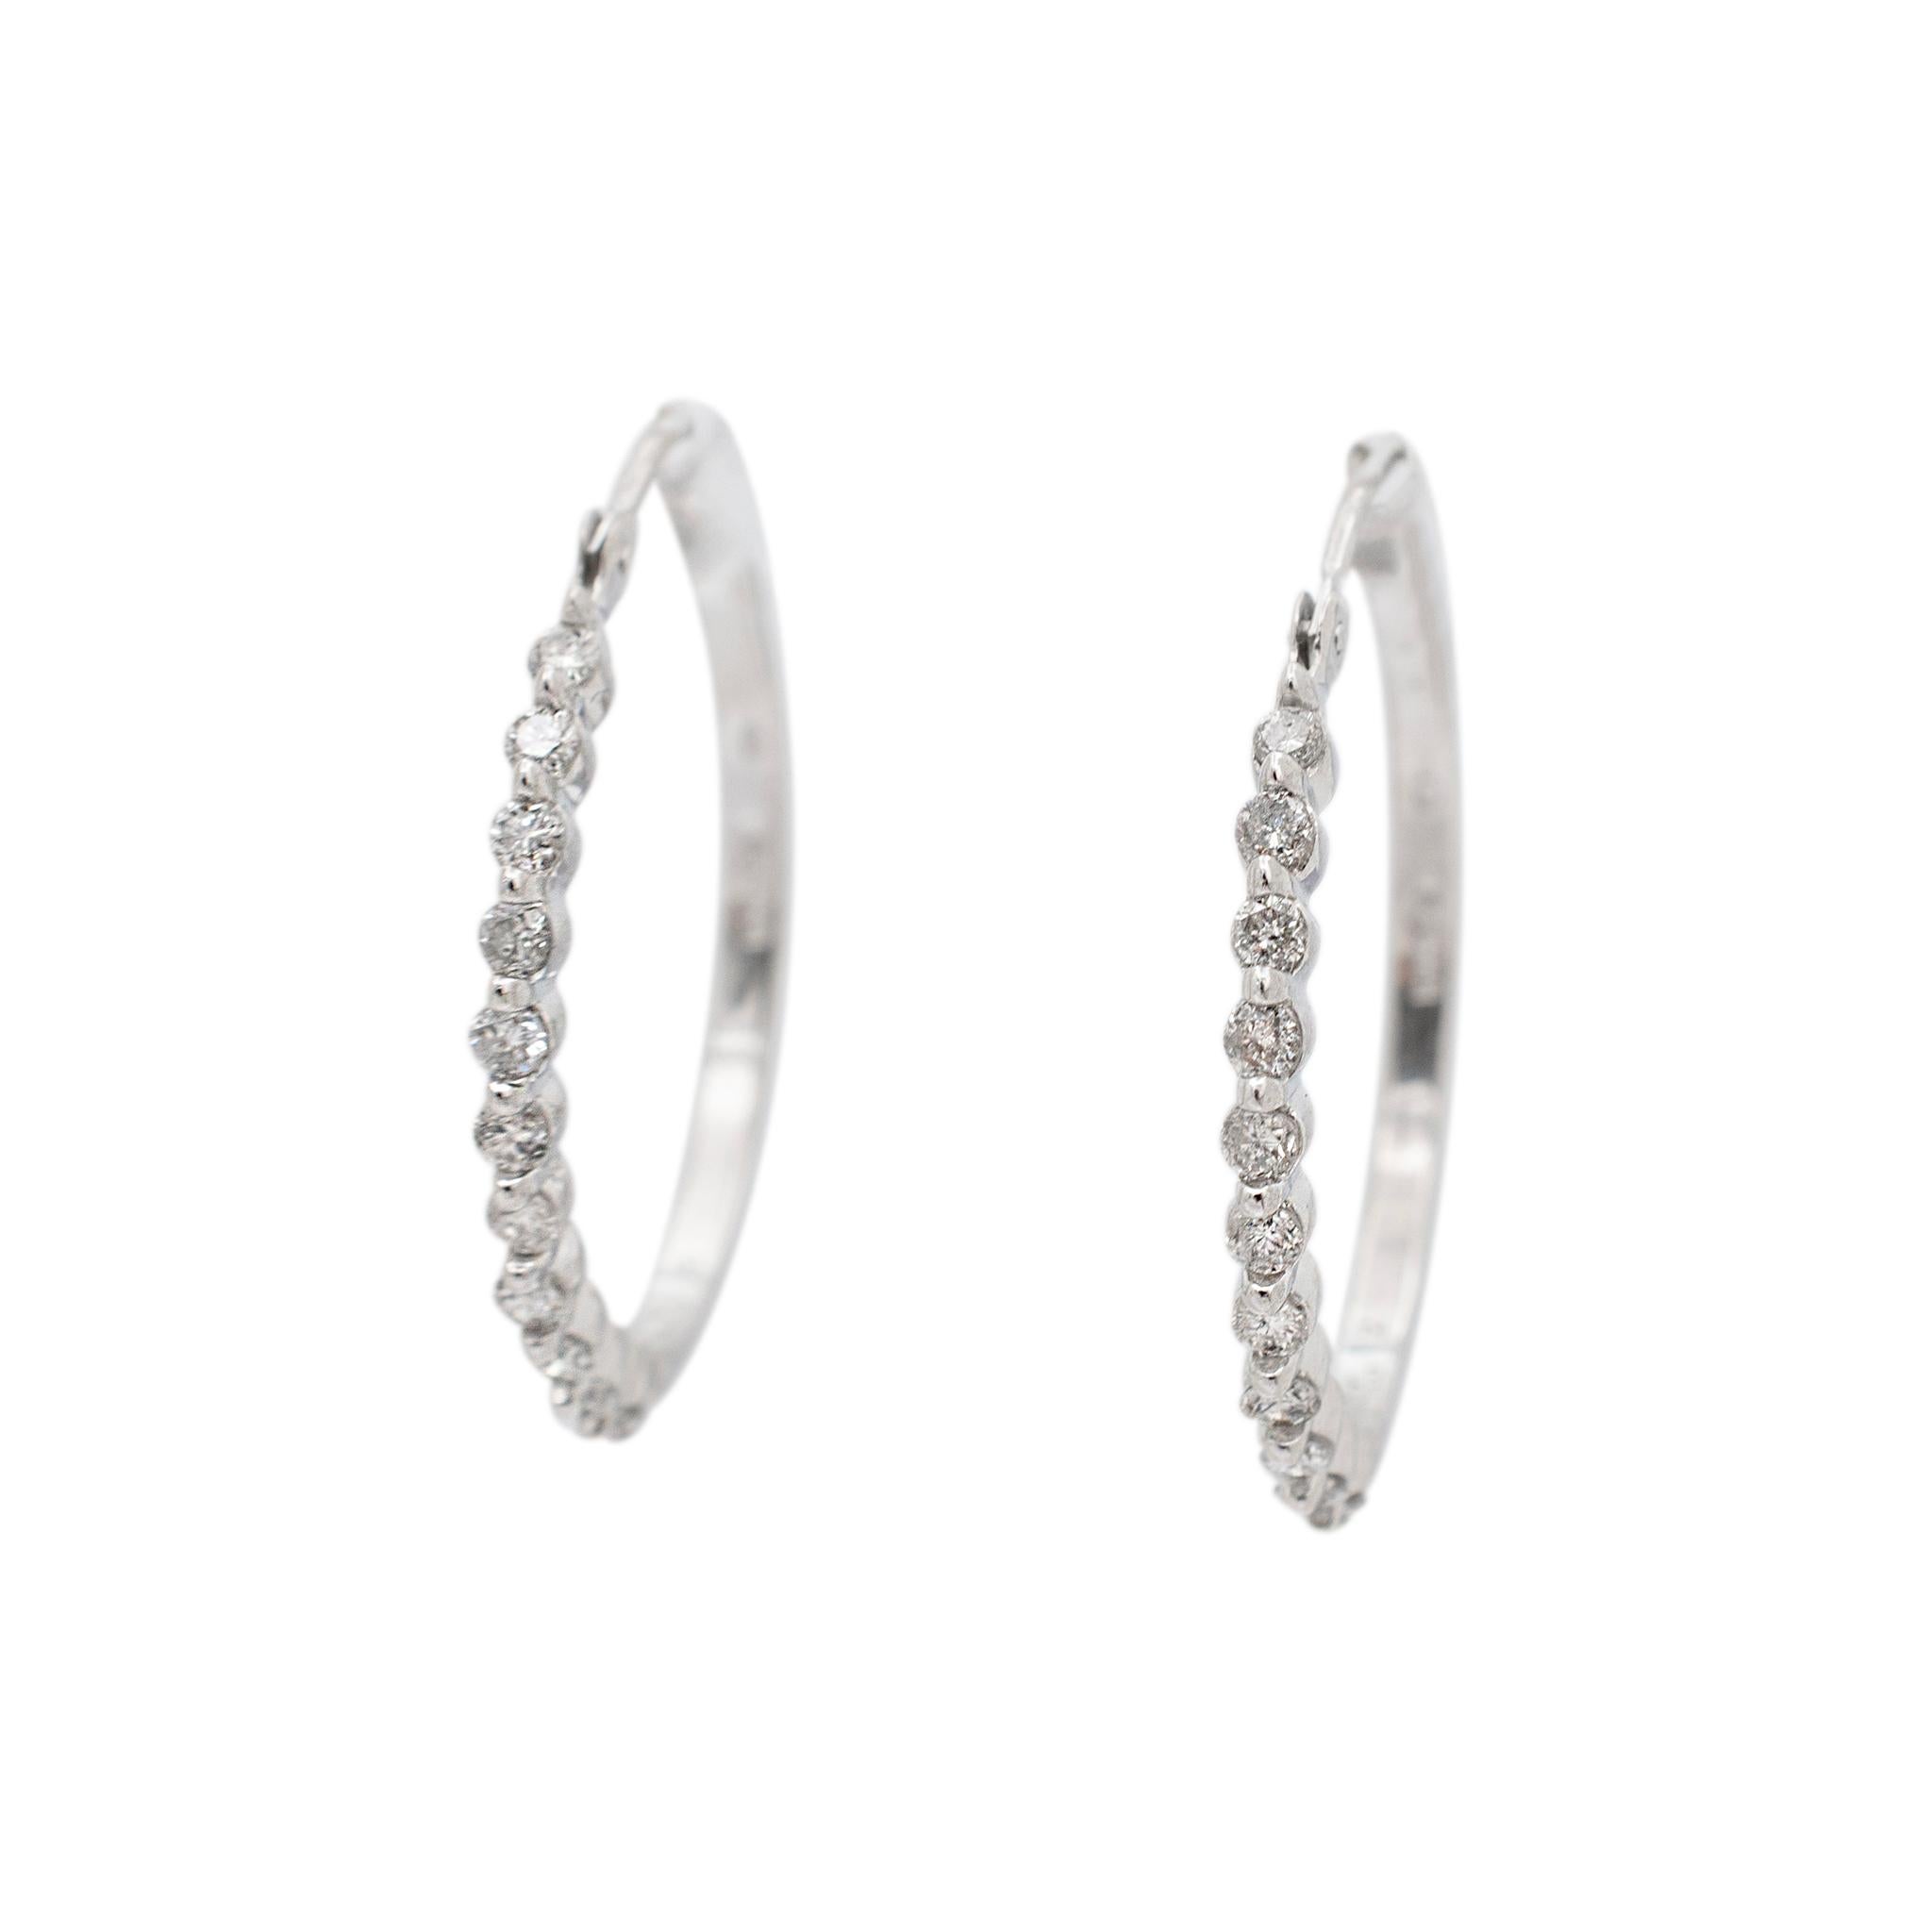 Gender: Ladies

Metal Type: 14K White Gold

Diameter: 24.00 mm

Weight: 3.40 grams
Ladies 14K white gold diamond hoop earrings. The metal was tested and determined to be 14K white gold. Engraved with 